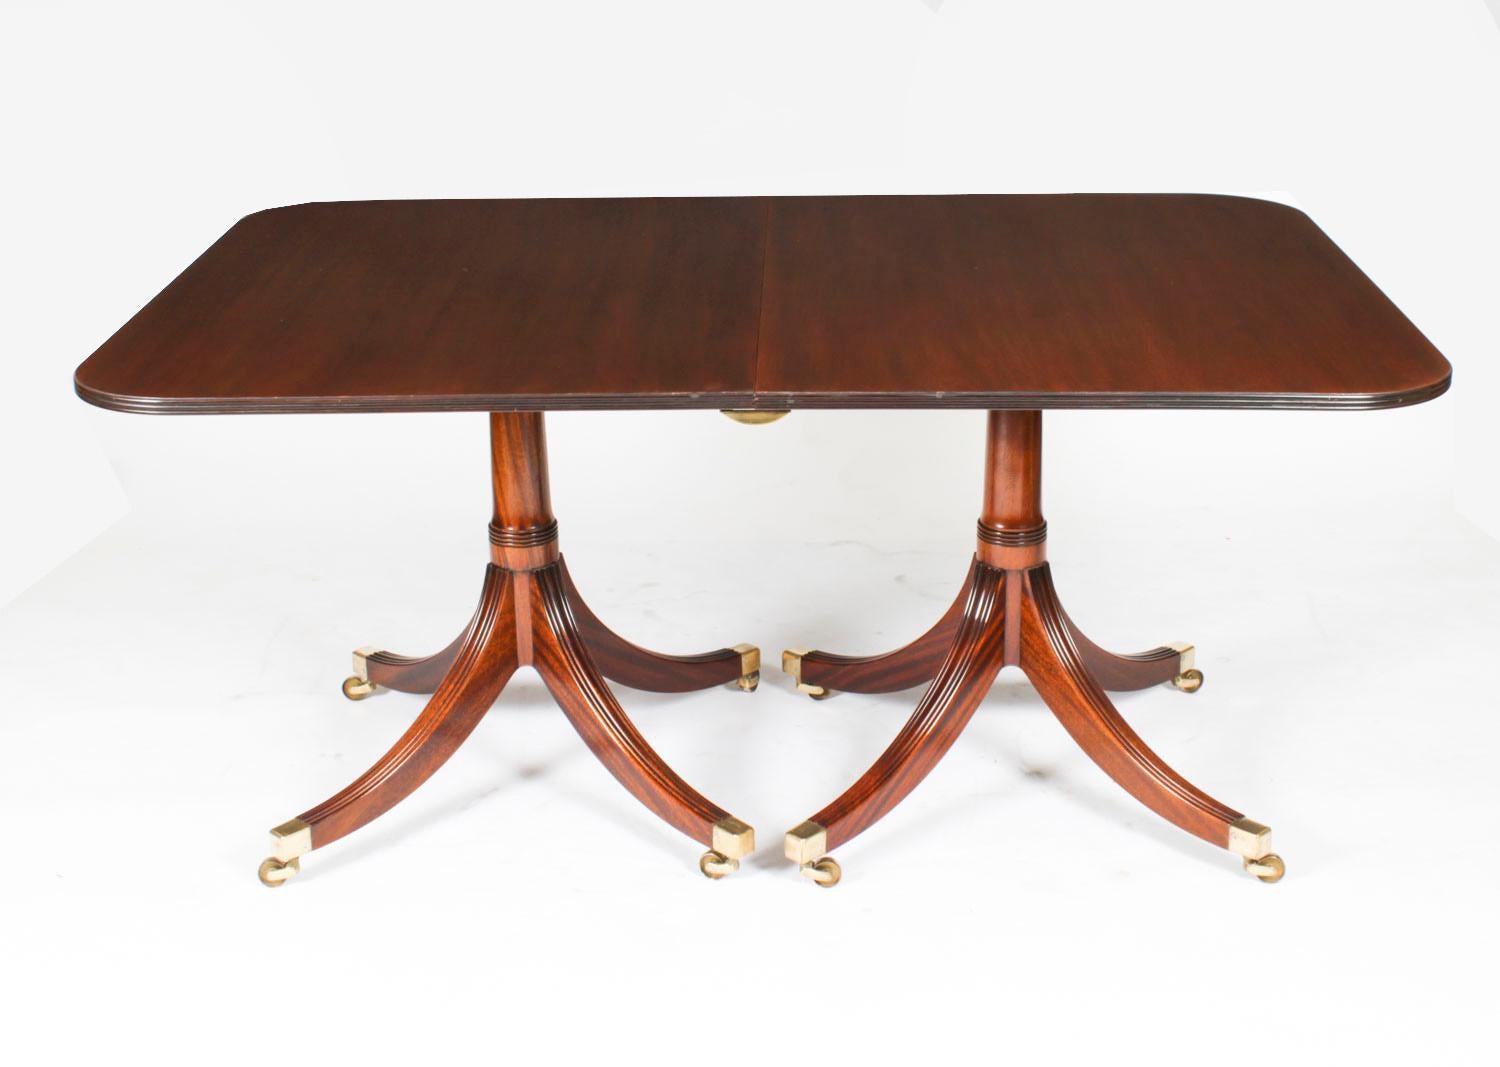 Vintage 7ft Regency Revival Dining Table William Tillman, Late 20th Century In Good Condition For Sale In London, GB